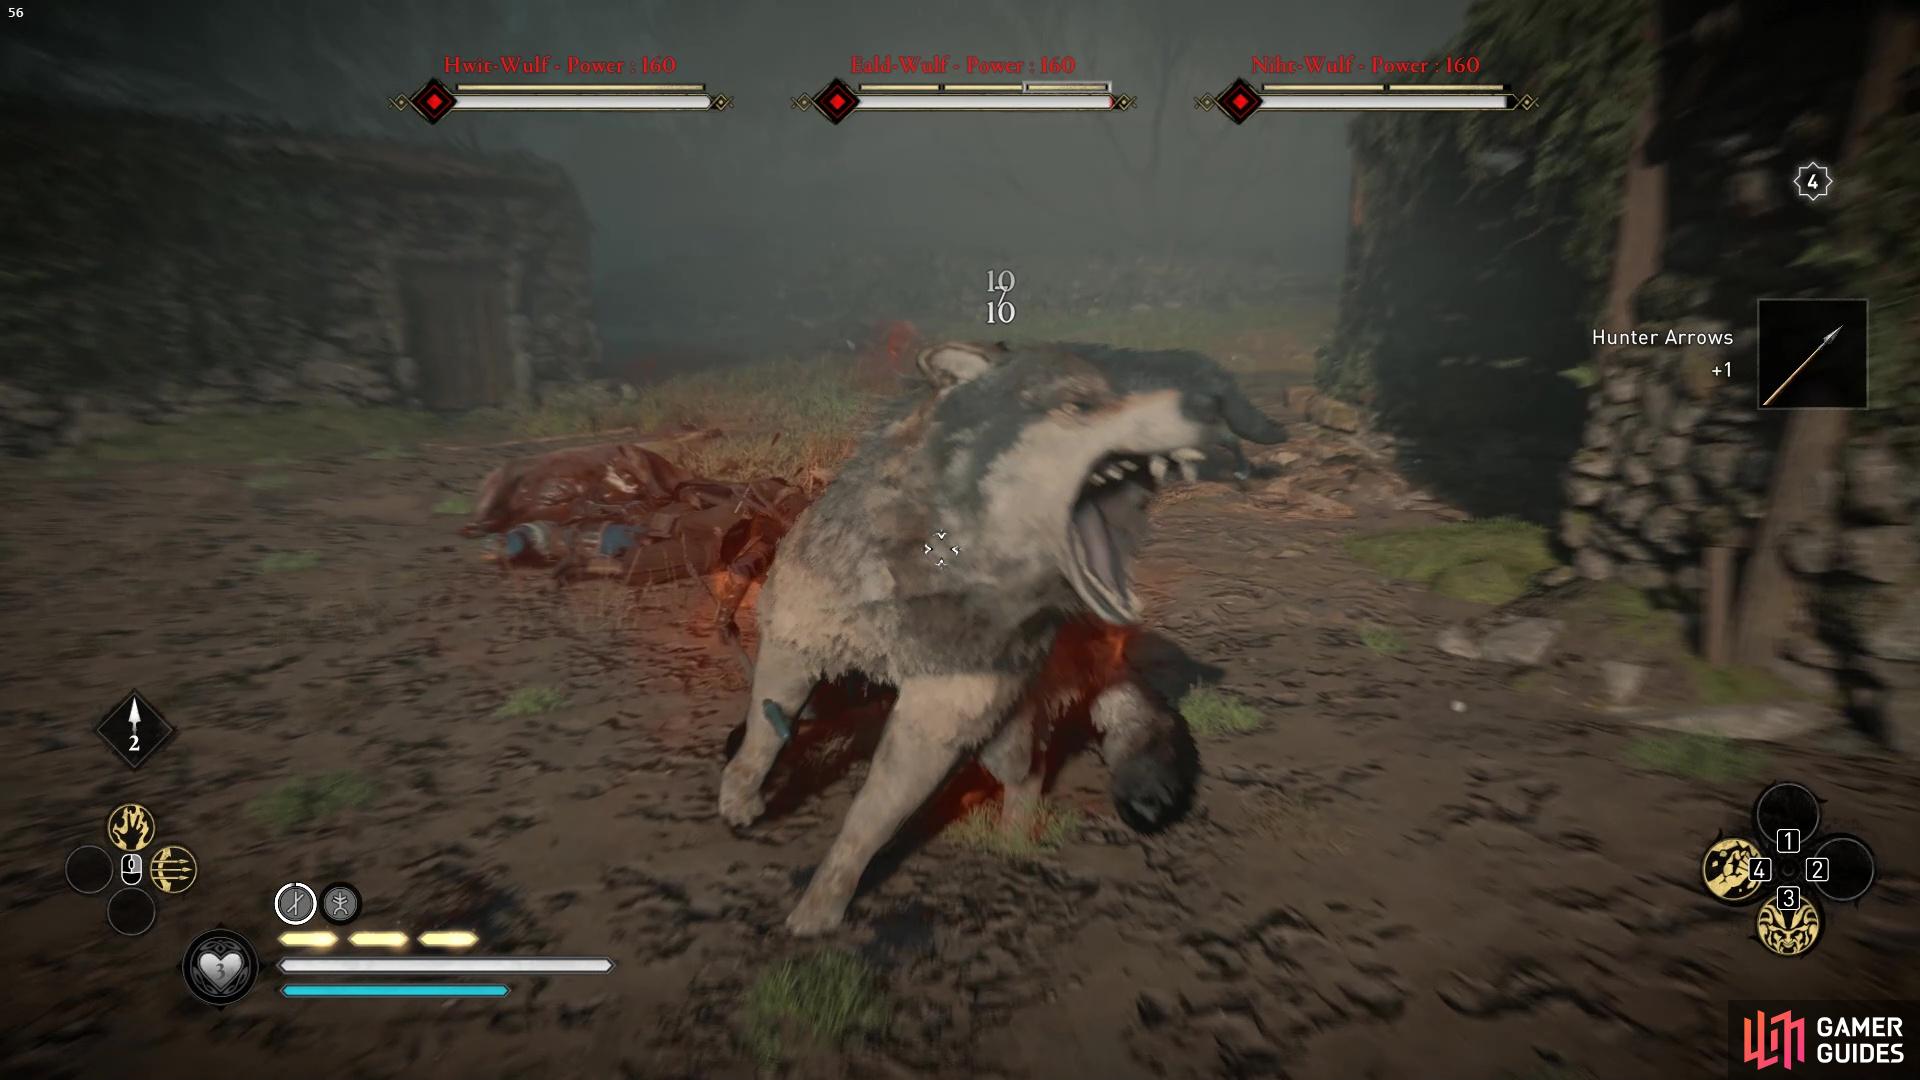 The big brown wolf is tanky but won't bite too hard.